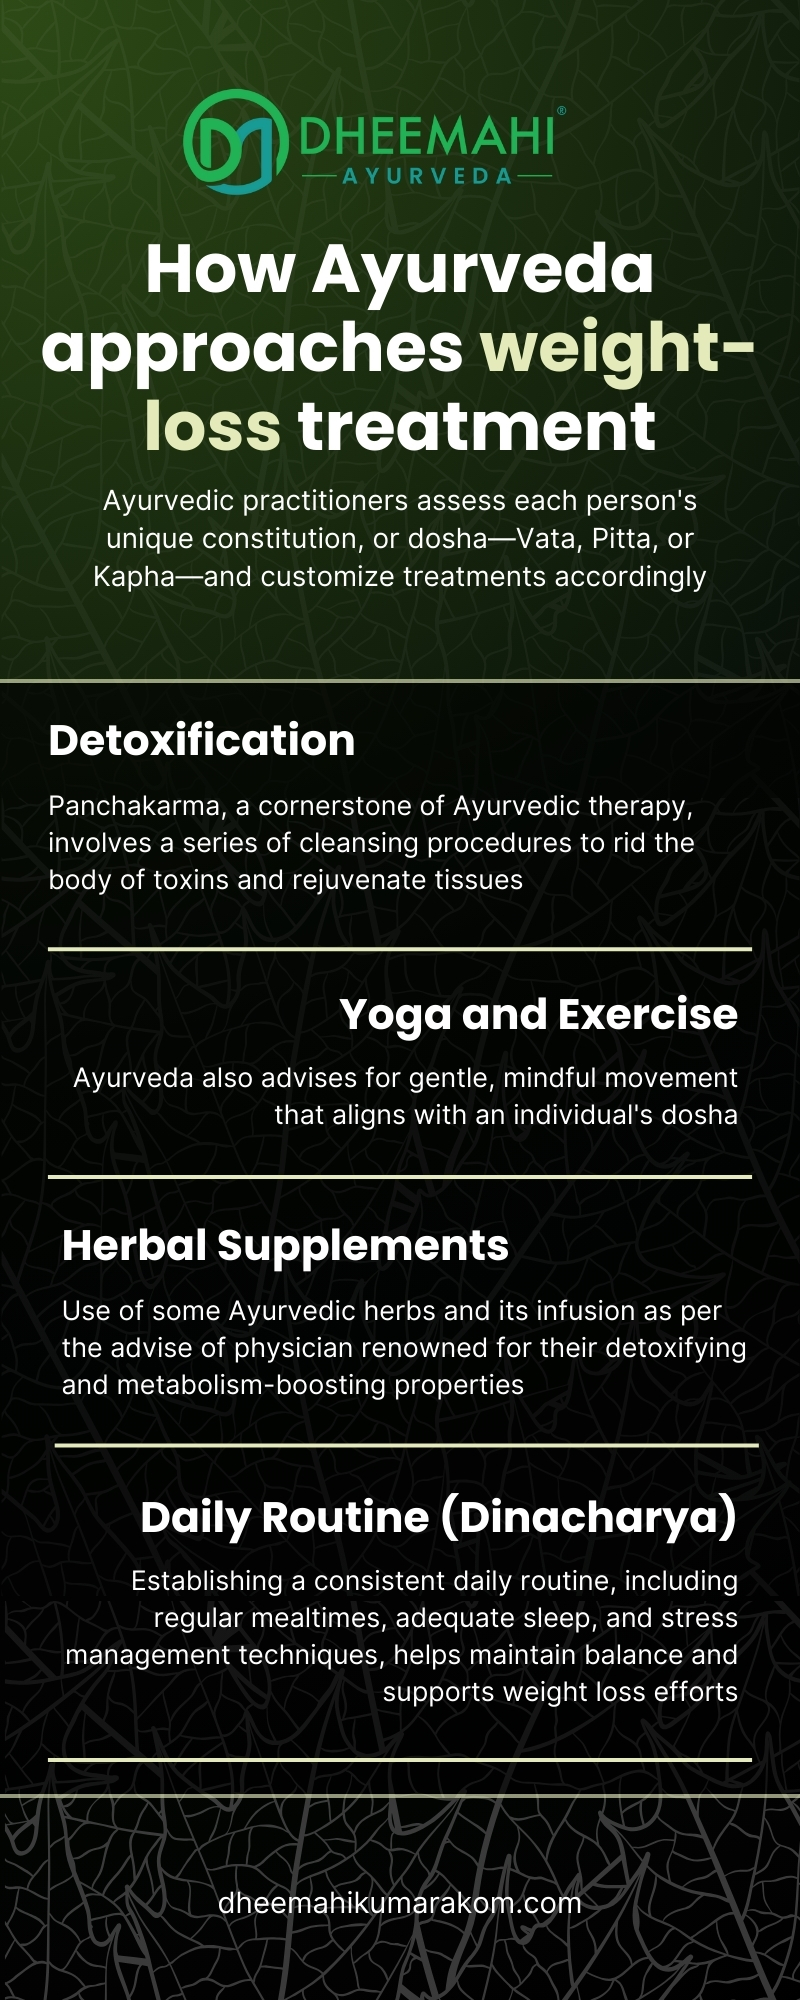 How Ayurveda approaches weight-loss treatment